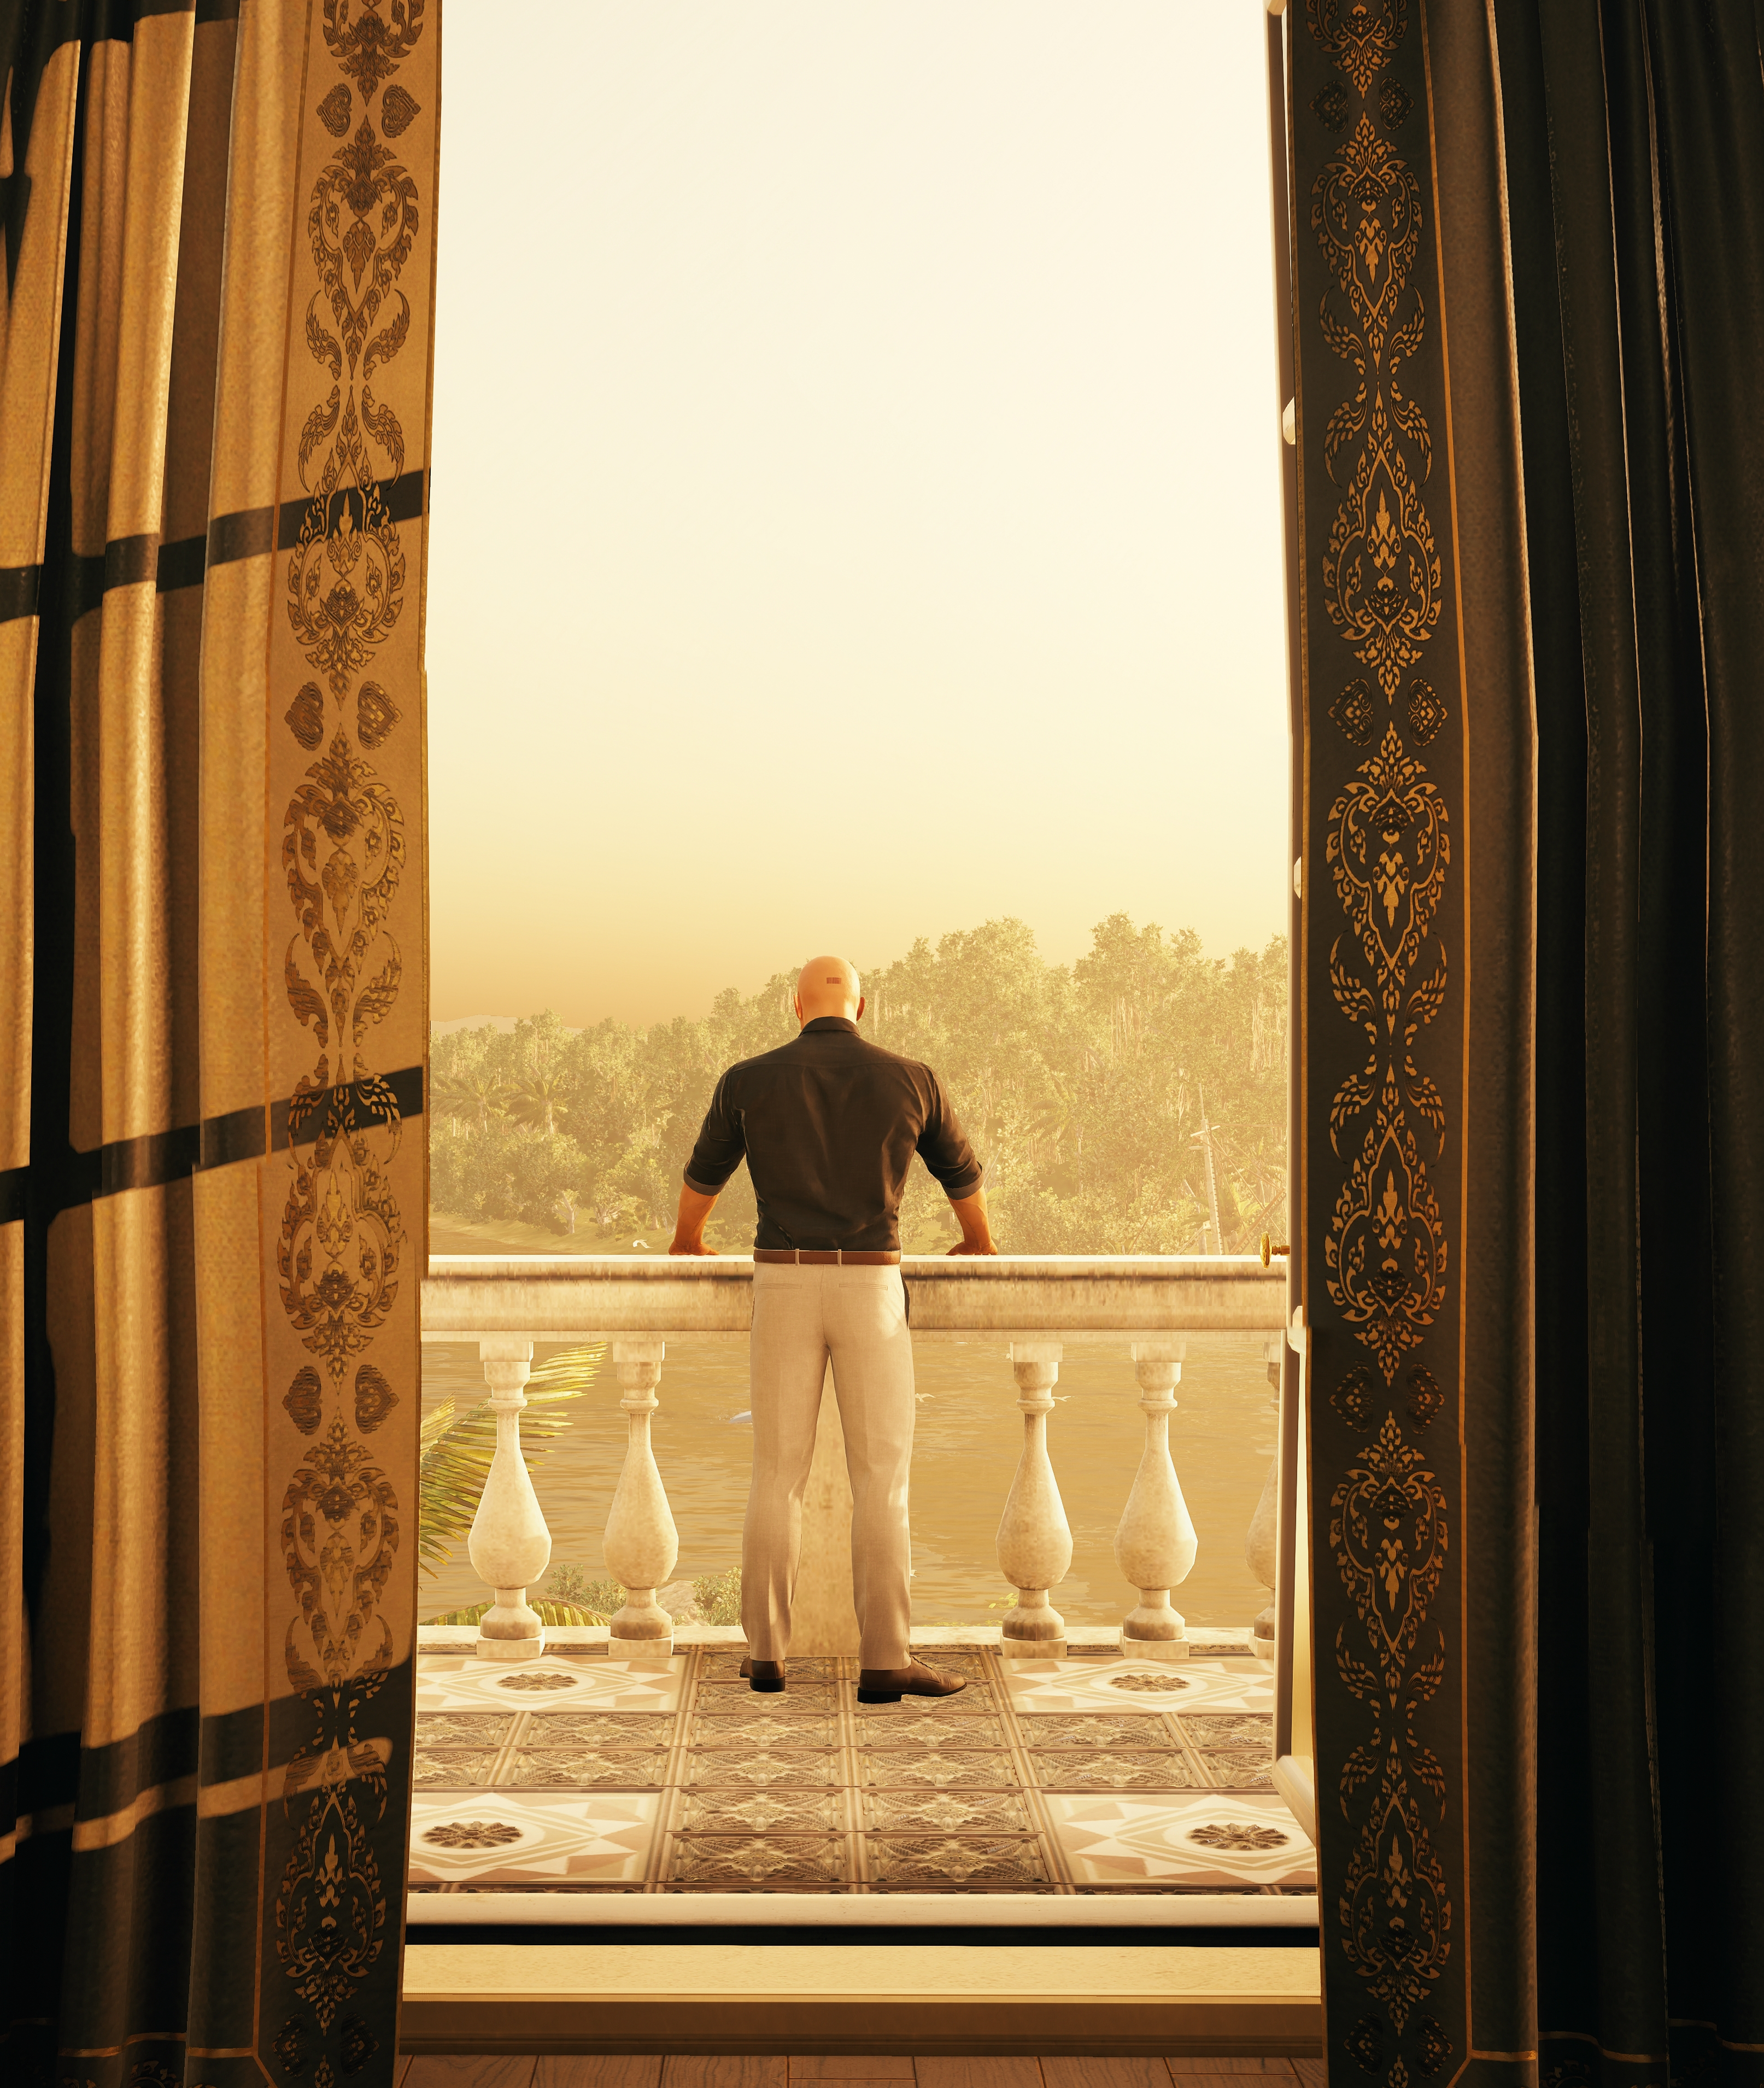 Hitman The Full Experience Art by HodgeDogs